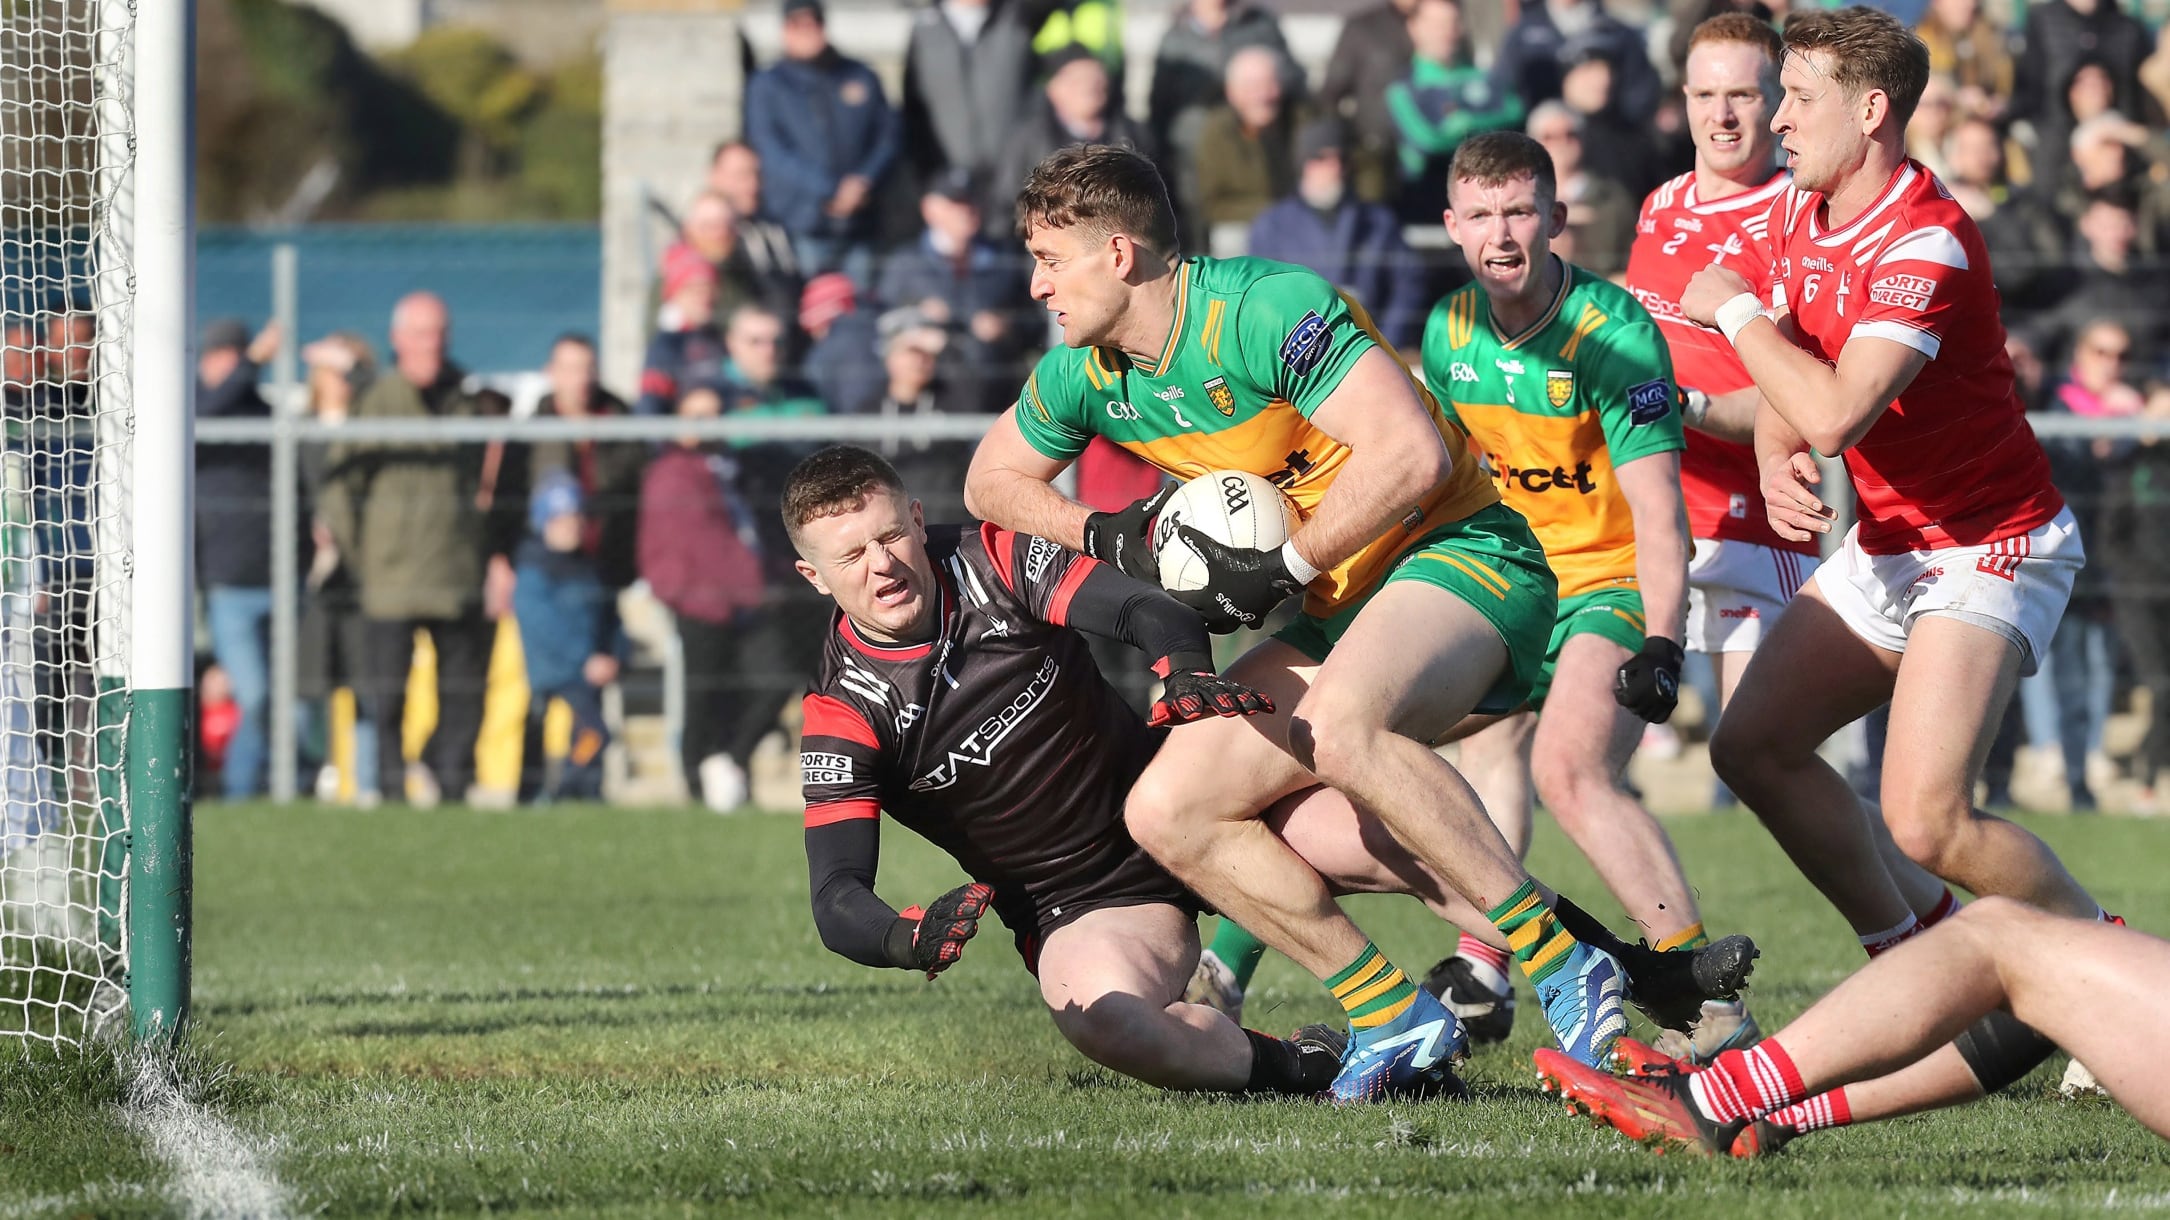 Donegal Hugh McFadden is challenged by Louth keeper Niall McDonnell close to the net where a goal was scored in the scramble during the National Football League match played at Fr Tierney Park in Ballyshannon on Sunday 3rd March 2024. Picture Margaret McLaughlin